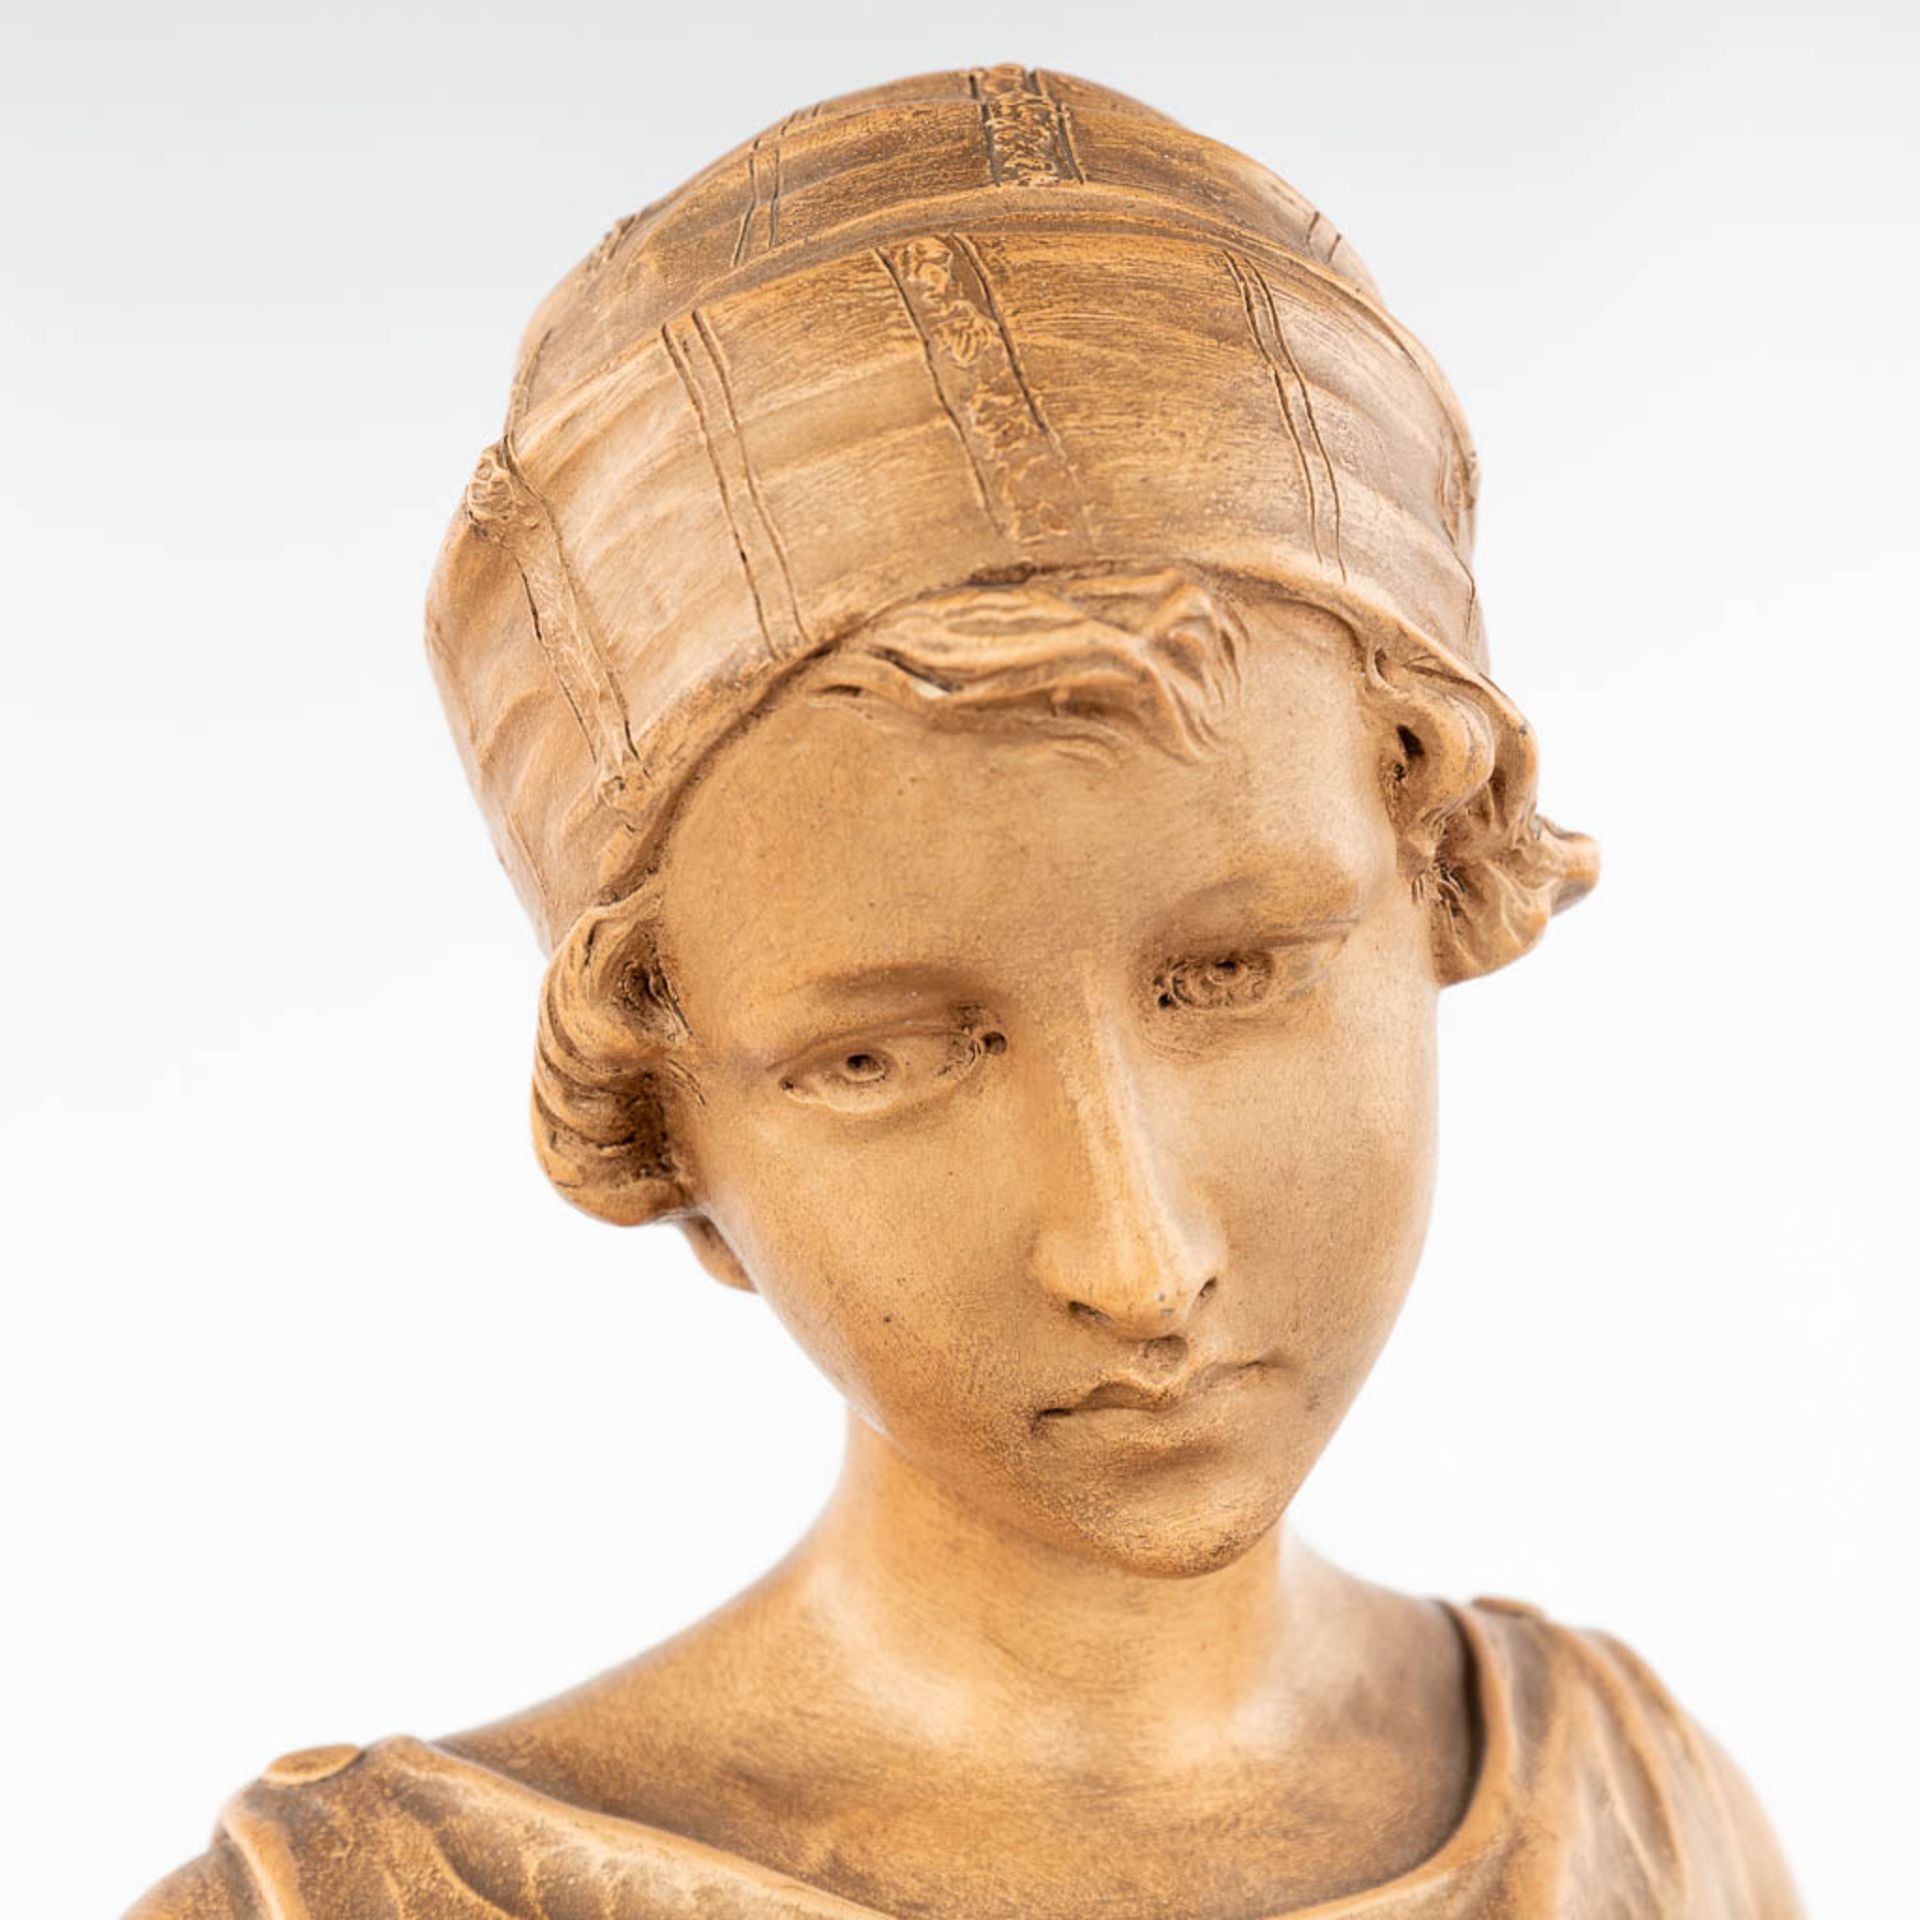 Richard AURILI (1834-c.1914) 'The Water carrier,' a figurine made of terracotta. (H:75,5 cm) - Image 4 of 12